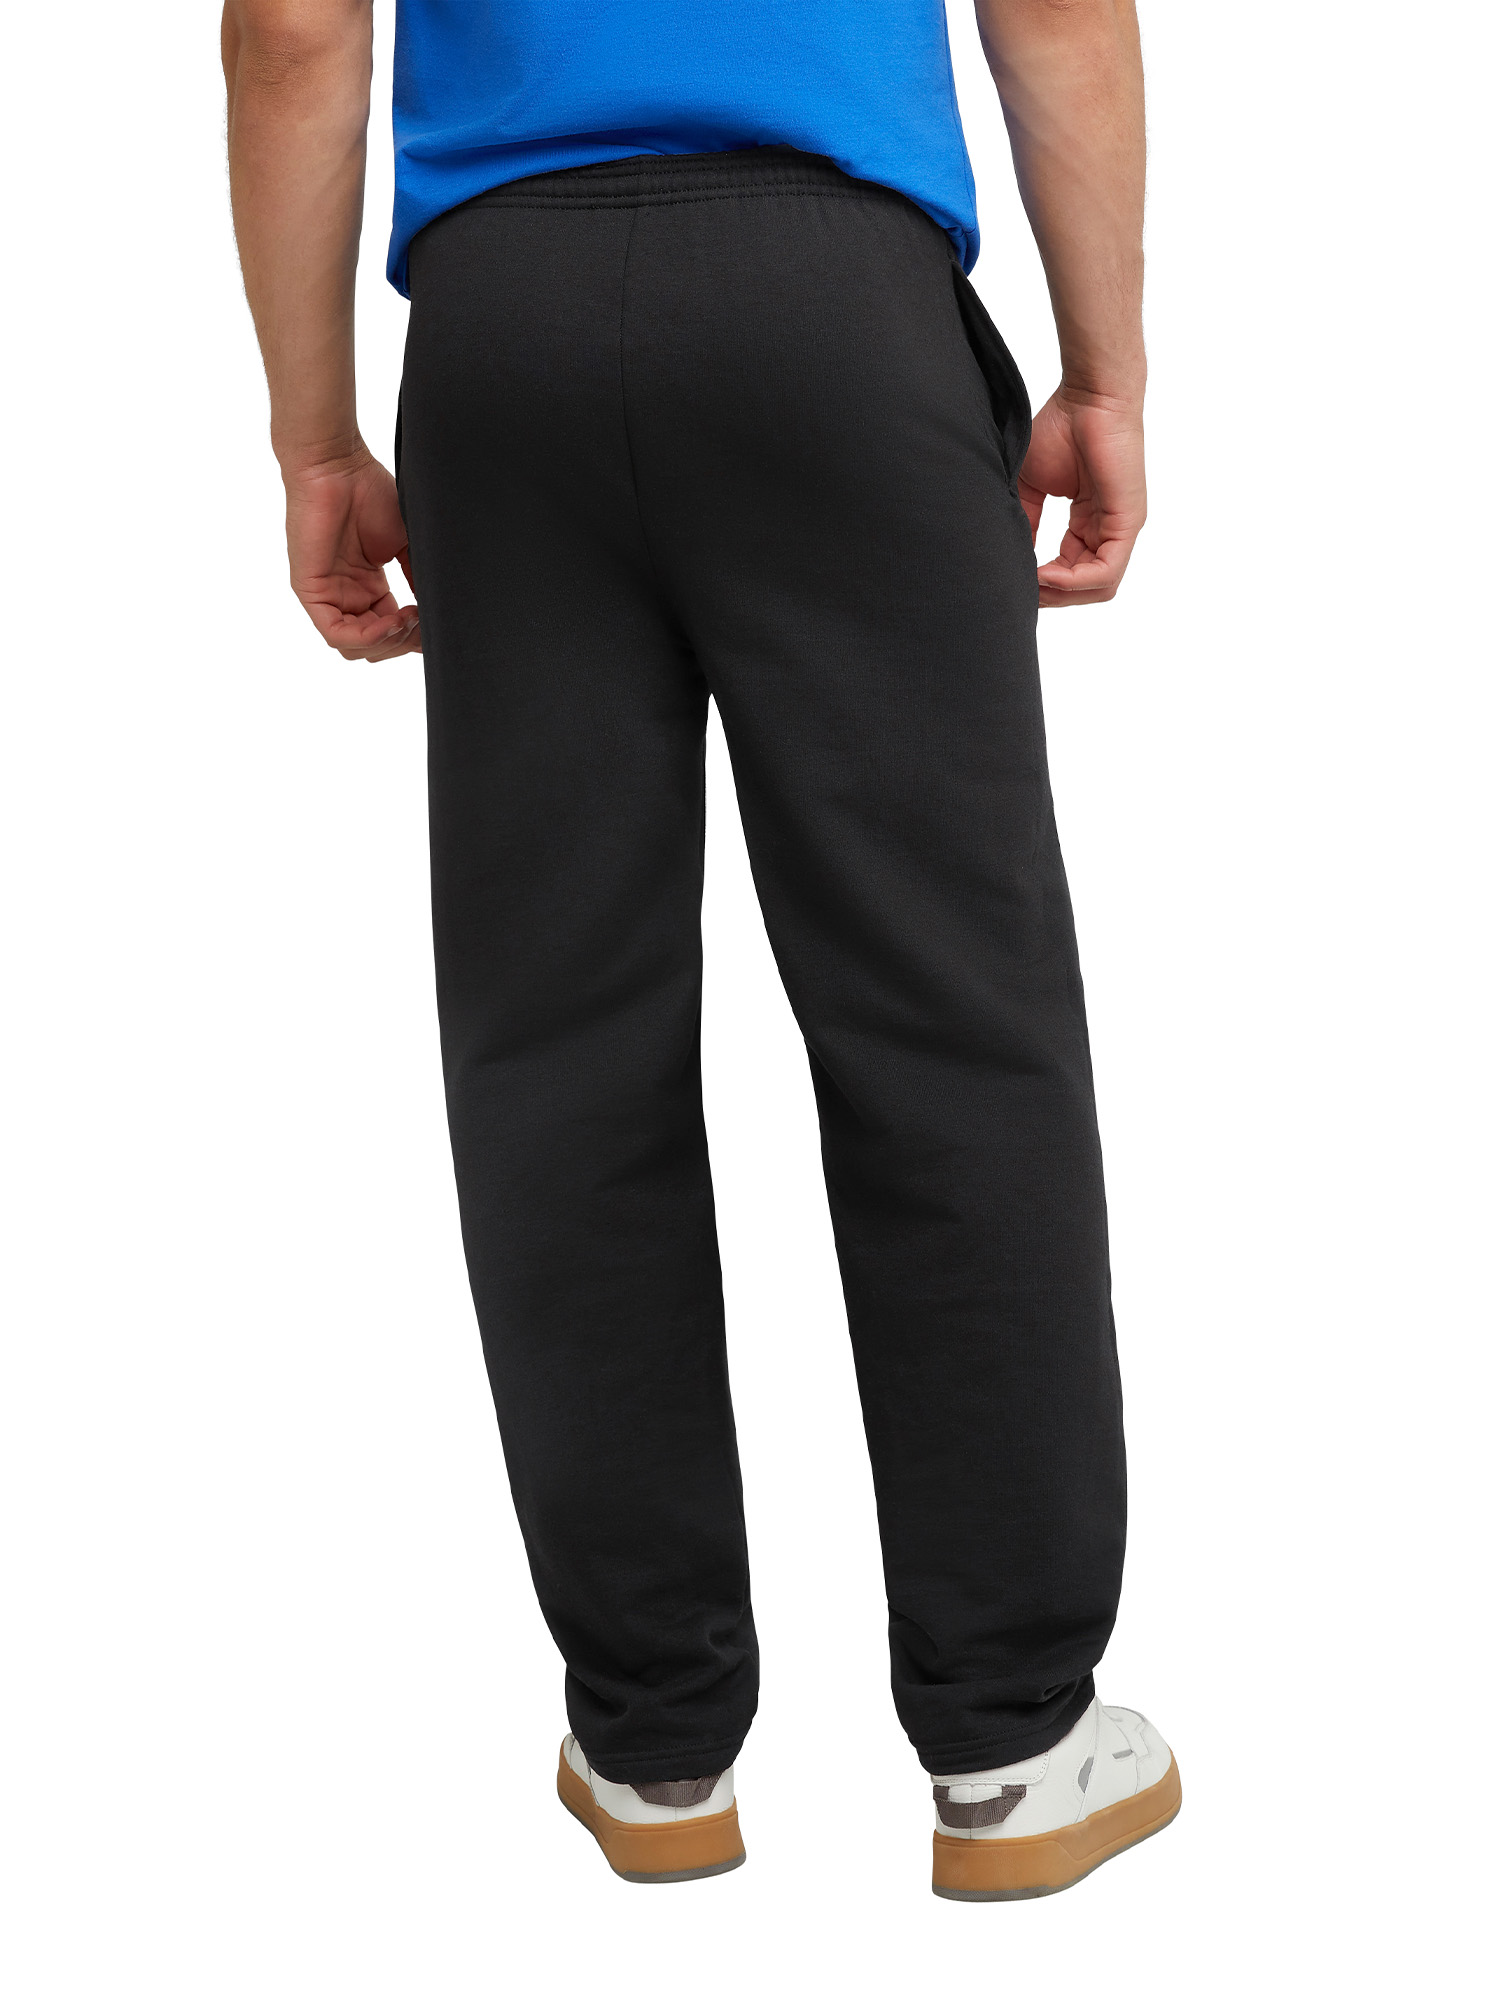 Hanes Men's and Big Men's EcoSmart Fleece Sweatpants with Pockets, up to Sizes 3XL - image 3 of 7